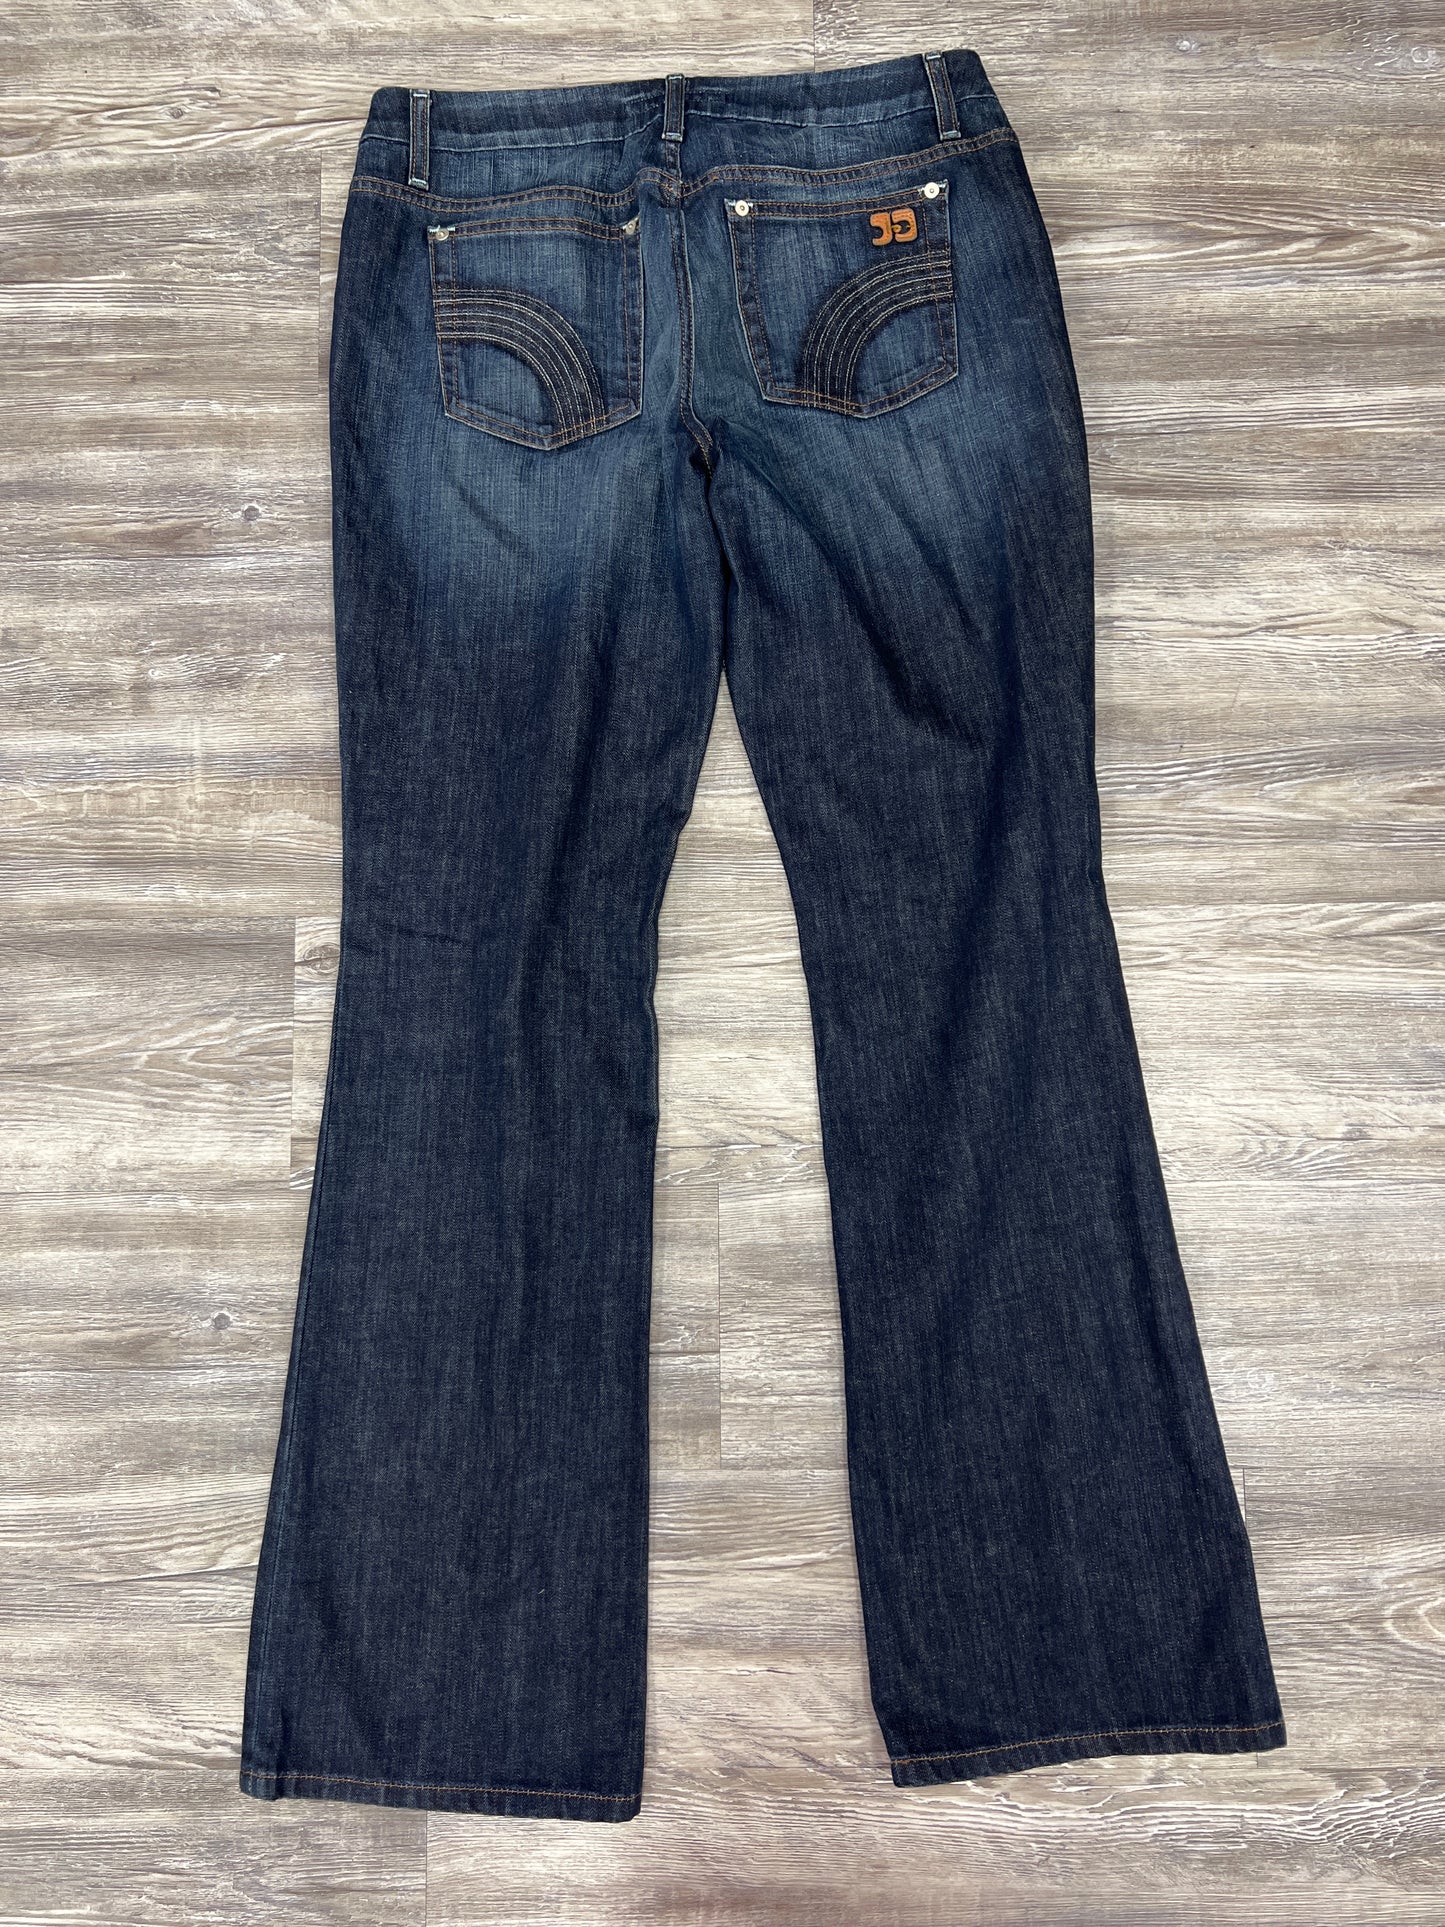 Jeans Designer By Joes Jeans Size: 14